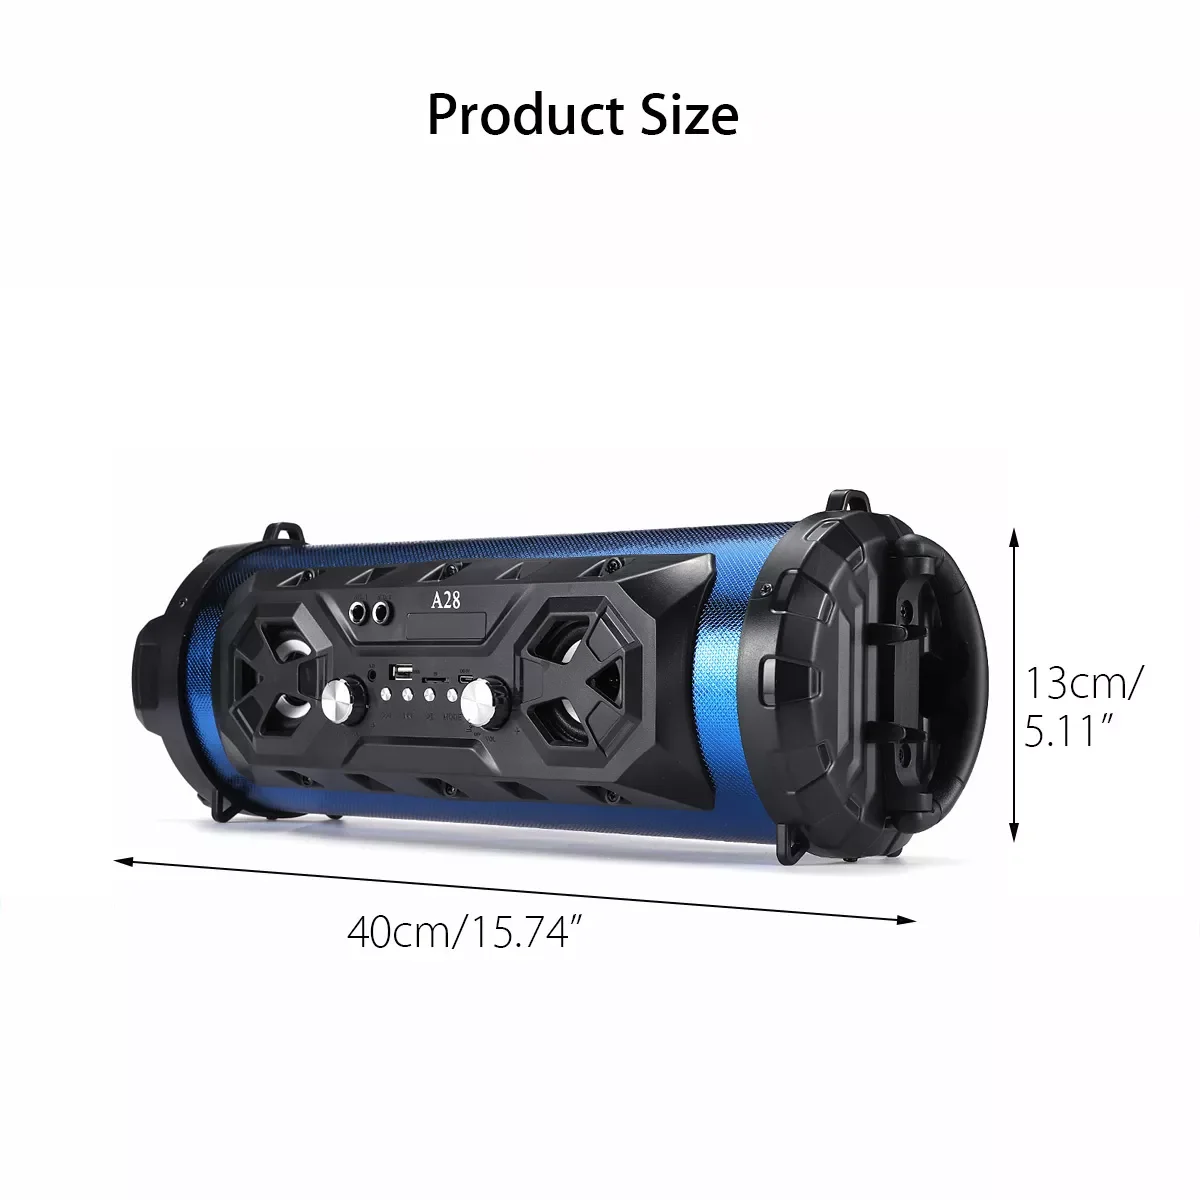 Colorful LED Light Portable bluetooth Speaker Powerful Wireless Outdoor Speaker Camping Party Subwoofer Surround Music Boombox enlarge